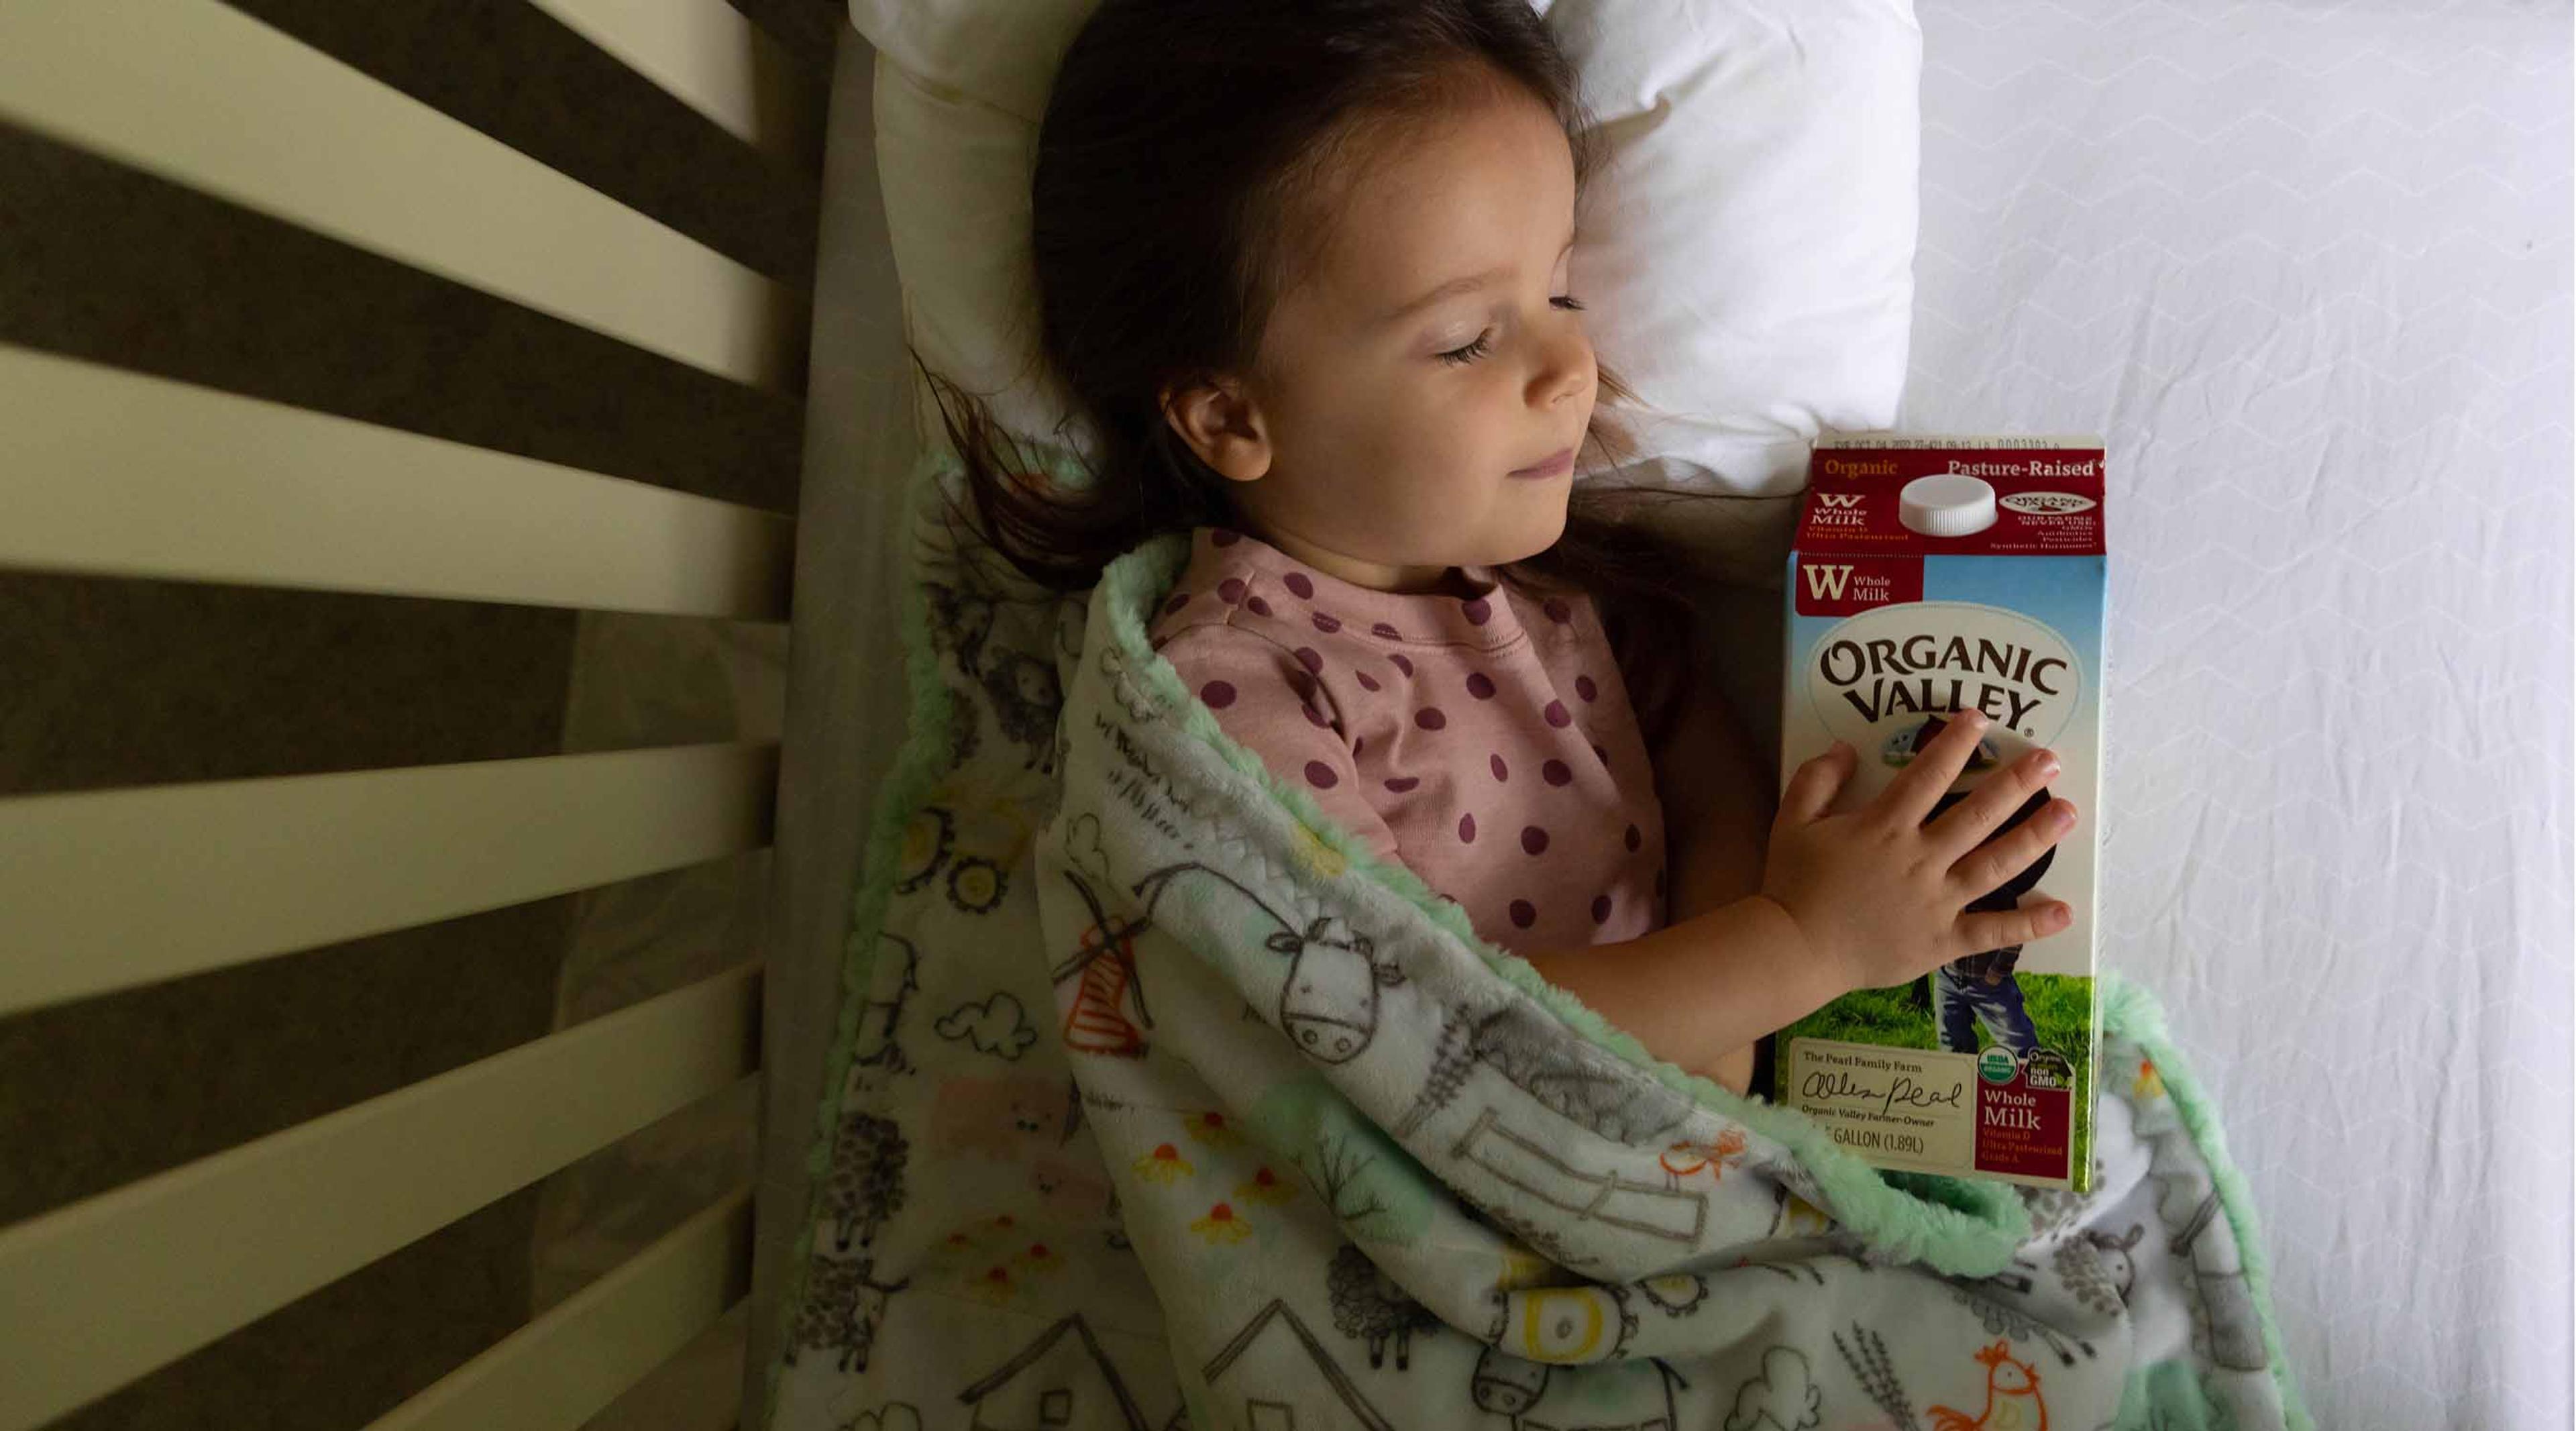 A toddler sleeps while holding Organic Valley milk